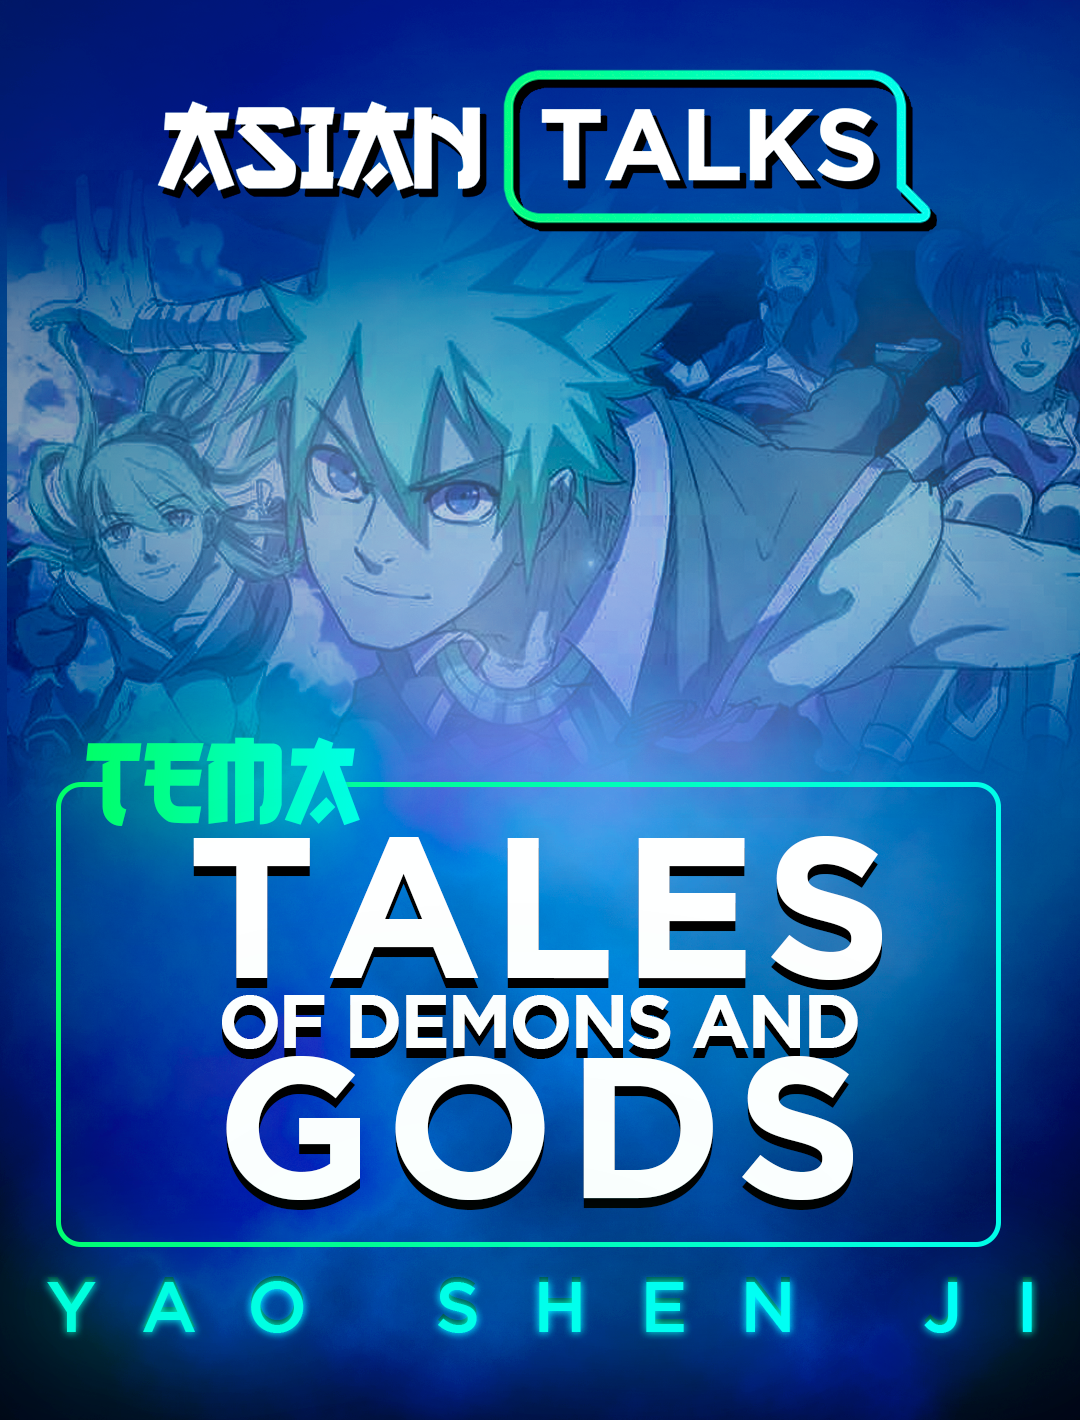 Asian Talks – Tales of Demons and Gods – 05/06 as 19h!